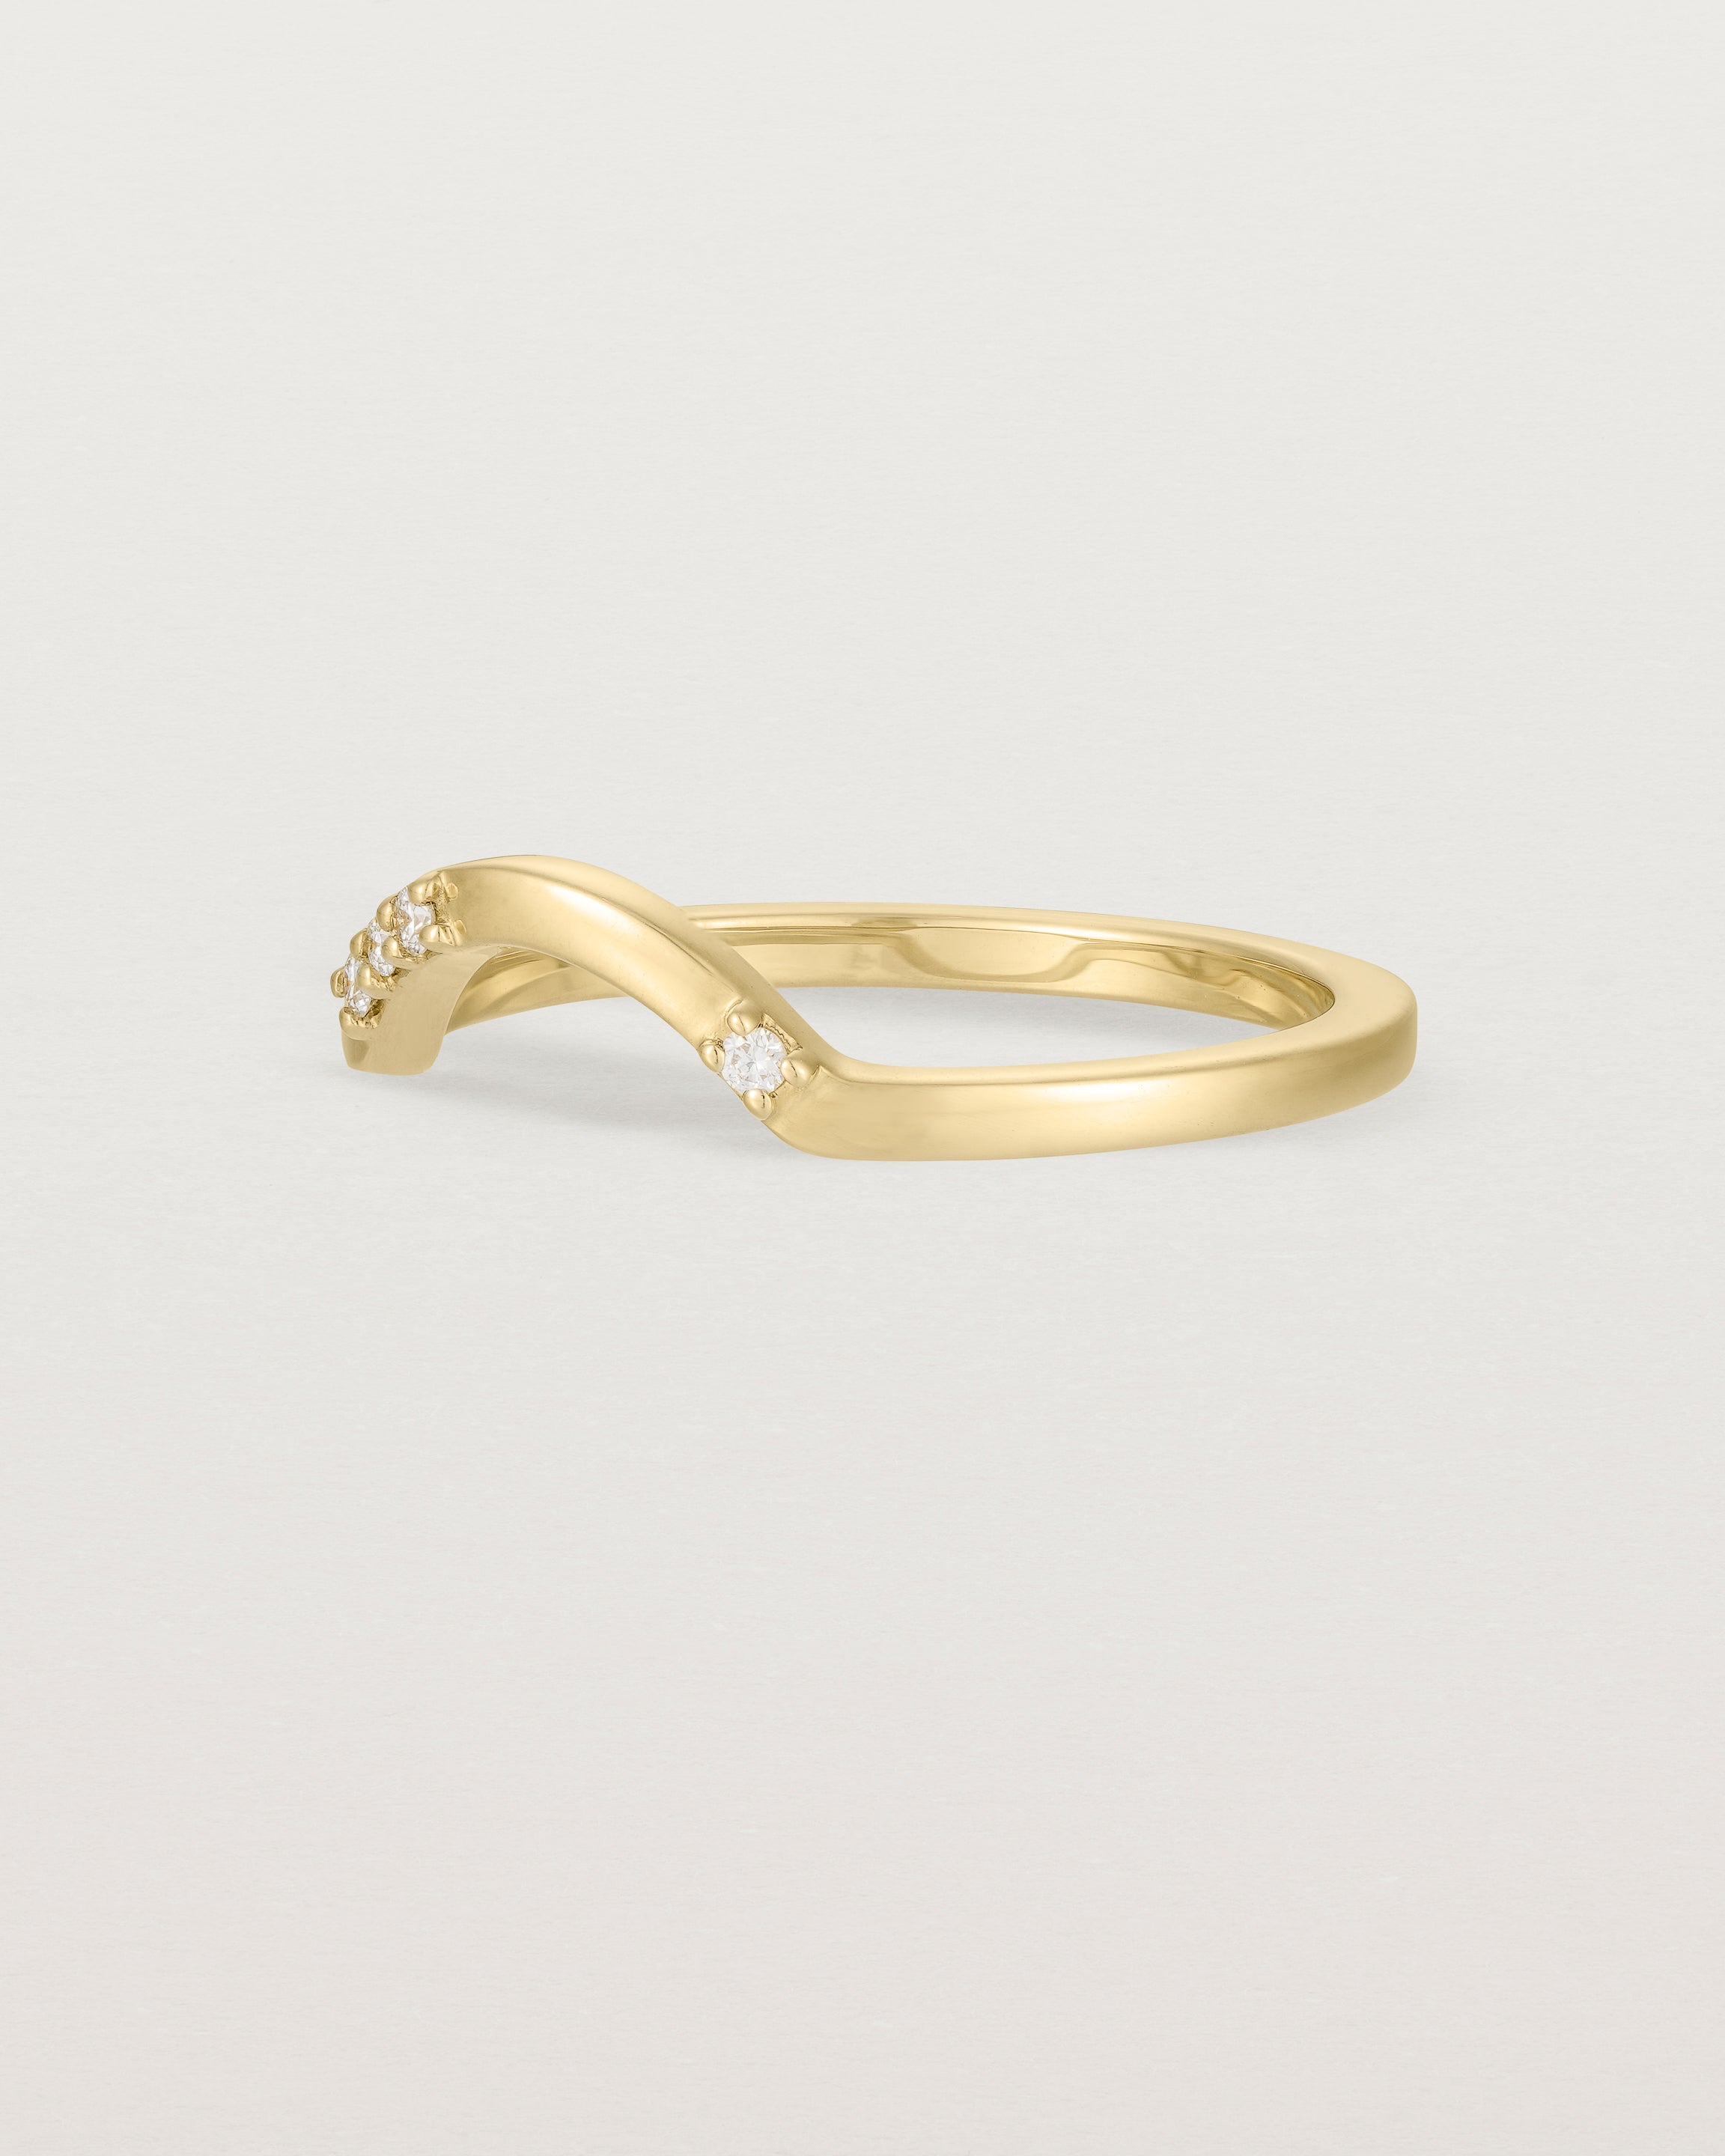 Fit four of a classic arc crown ring featuring scattered white diamonds, crafted in yellow gold